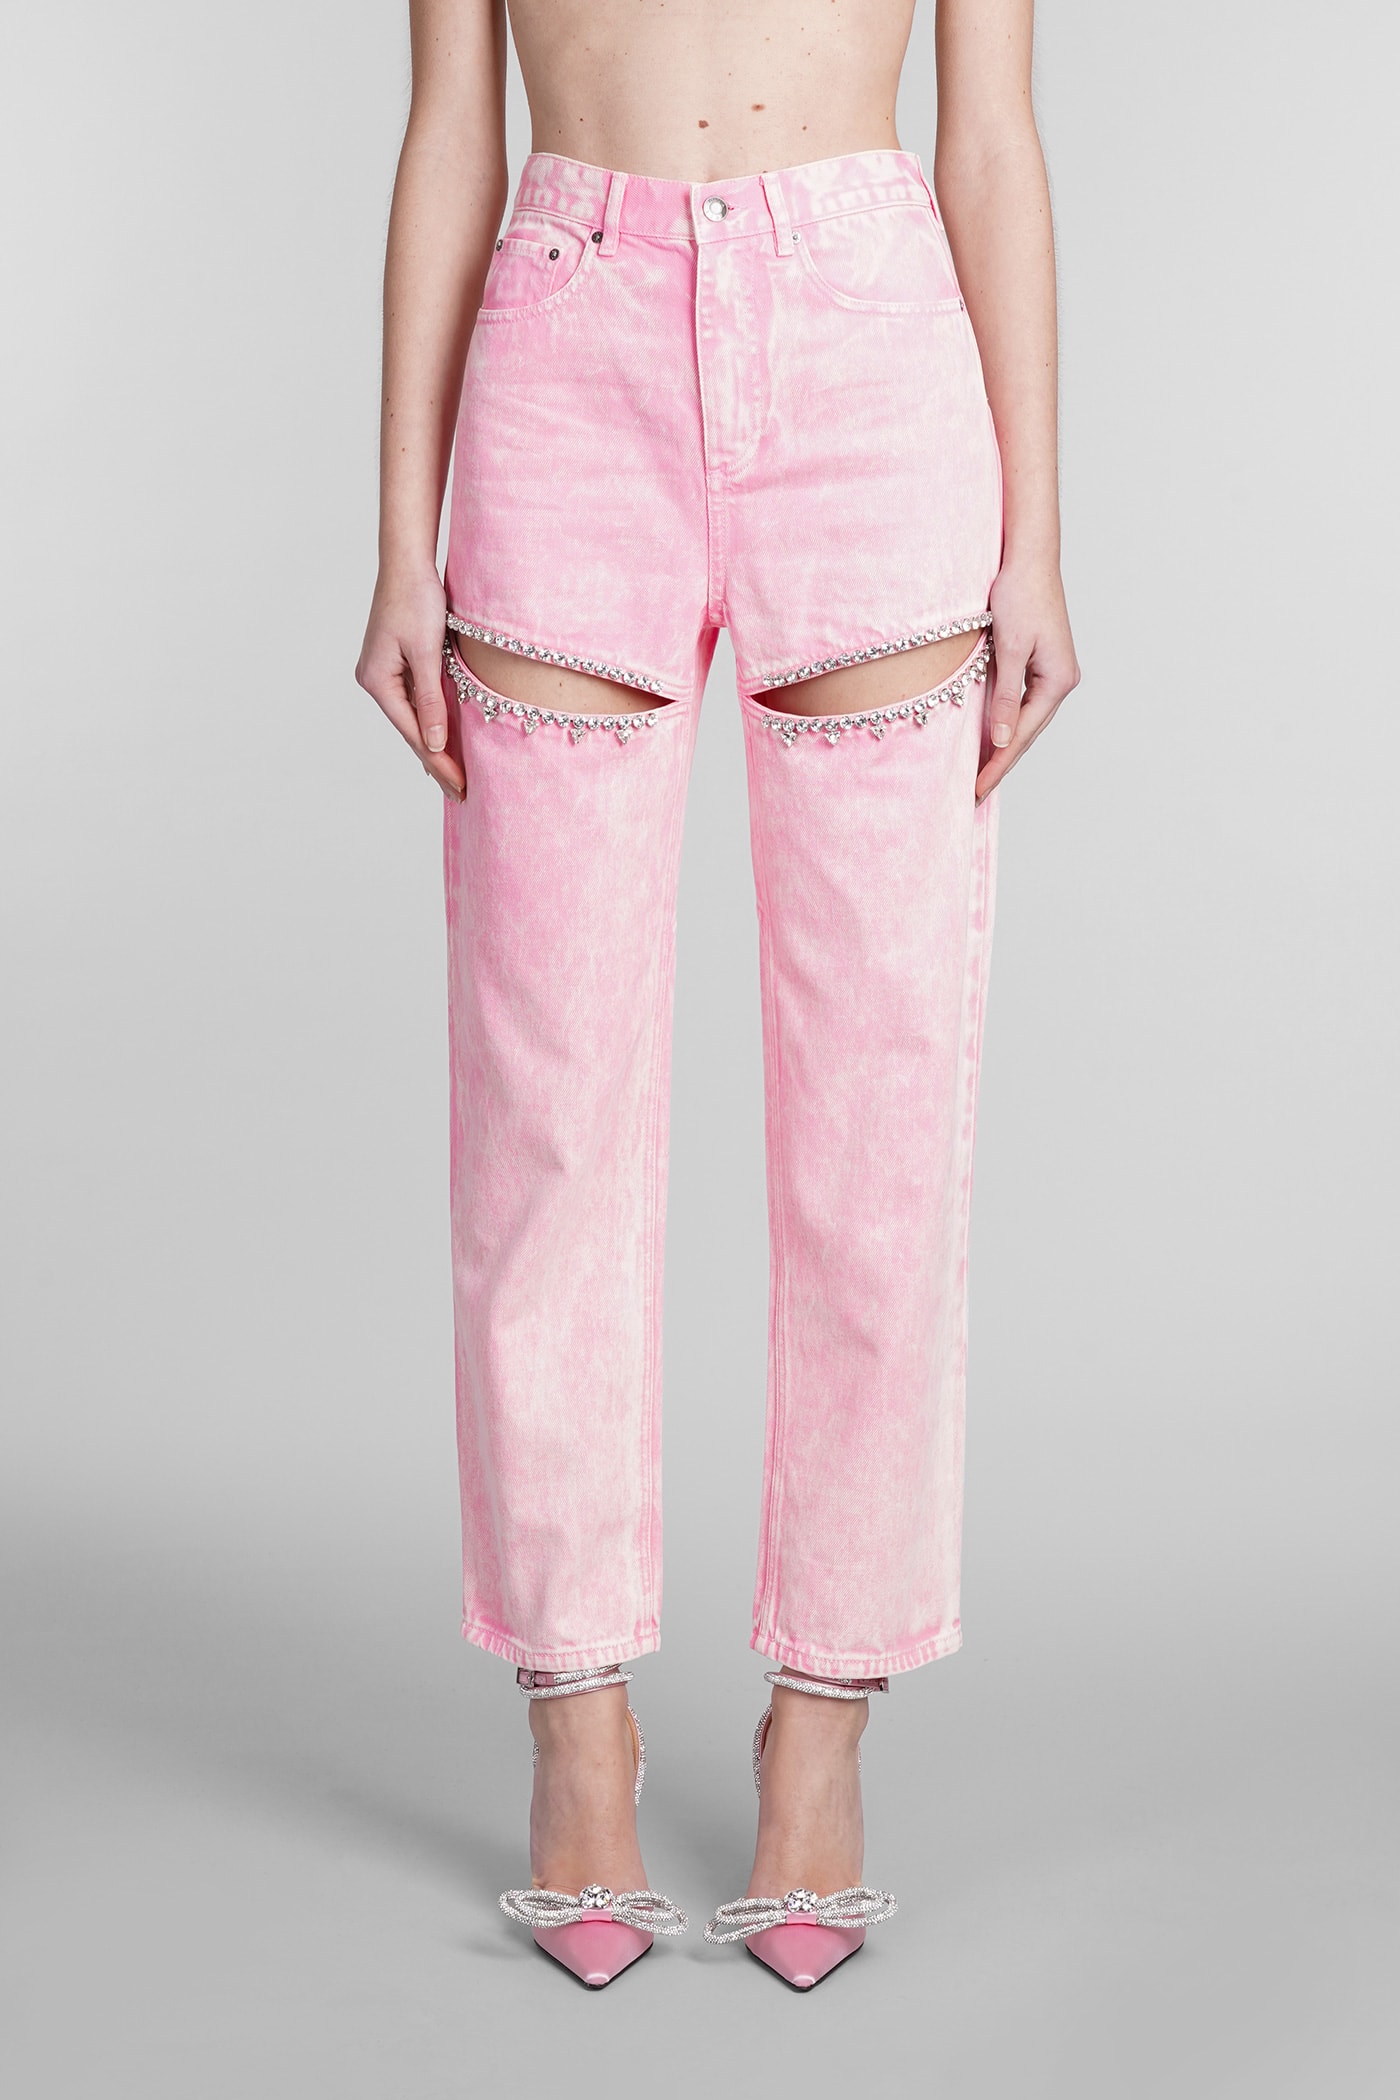 Jeans In Rose-pink Cotton